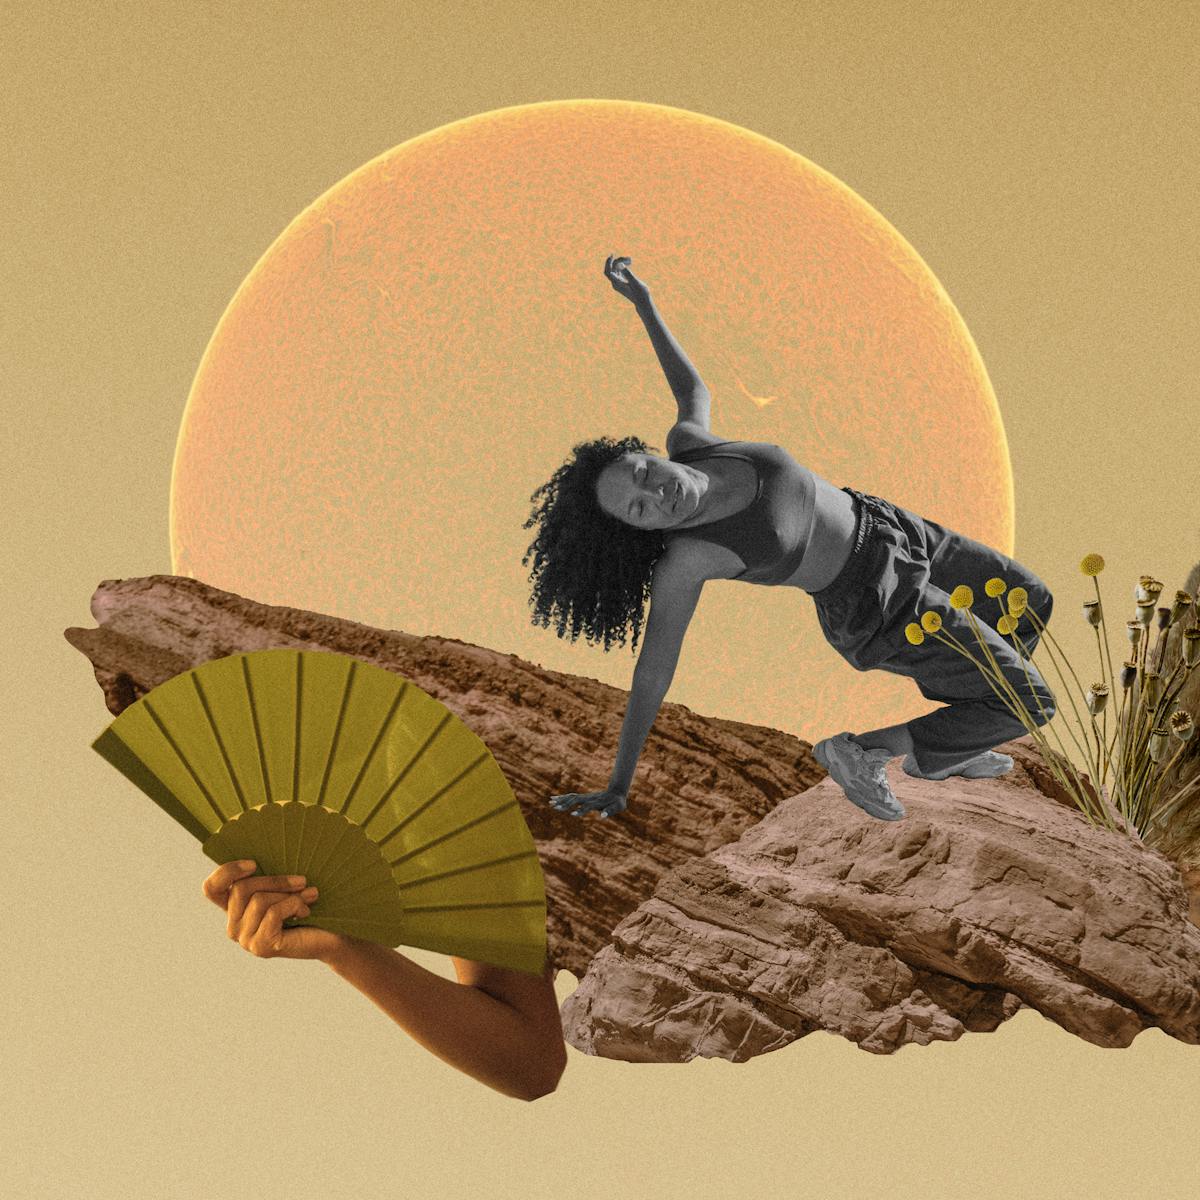 Digital collage artwork made up of yellow, orange and black and white hues. An older woman dressed in a vest, tracksuit bottoms and trainers energetically jumps over a sandy rock outcrop. Behind her is a large burning sun. The rocks are adorned with an arm holding a concertina fan, a cupped hand holding grains of sand and various dried grasses and seed heads.